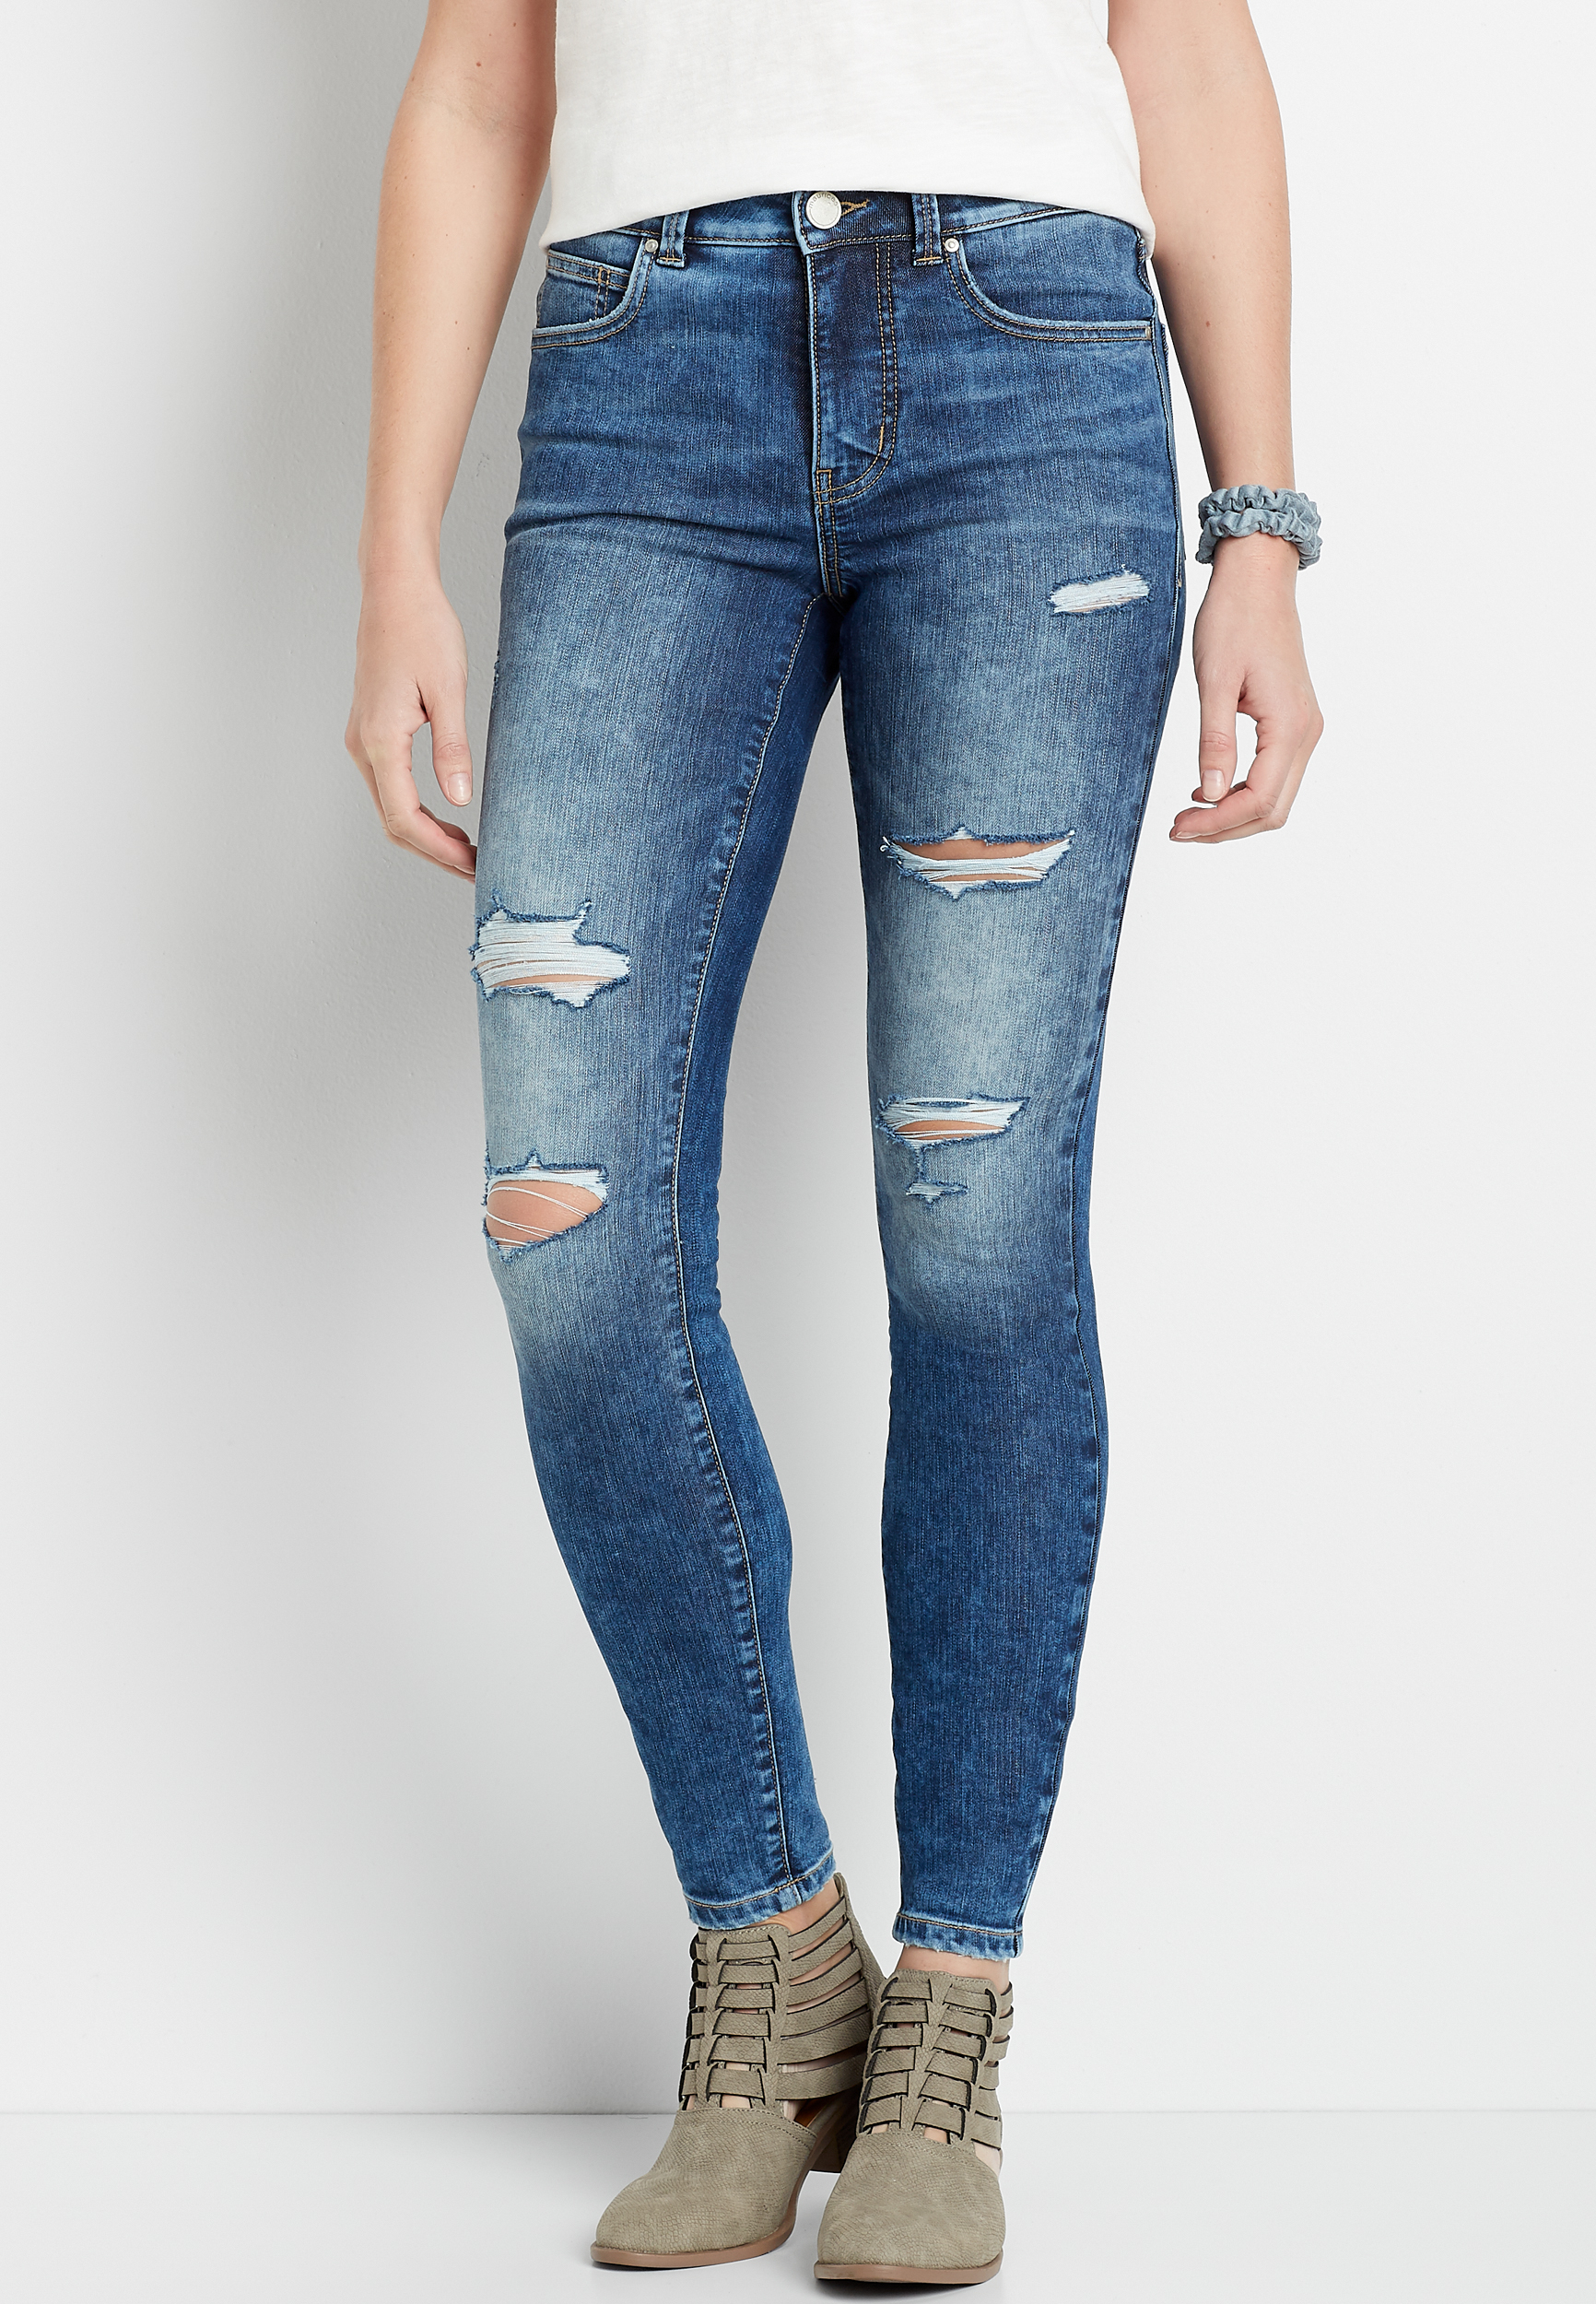 m jeans by maurices™ Everflex™ Super Skinny High Rise Stretch Ripped ...